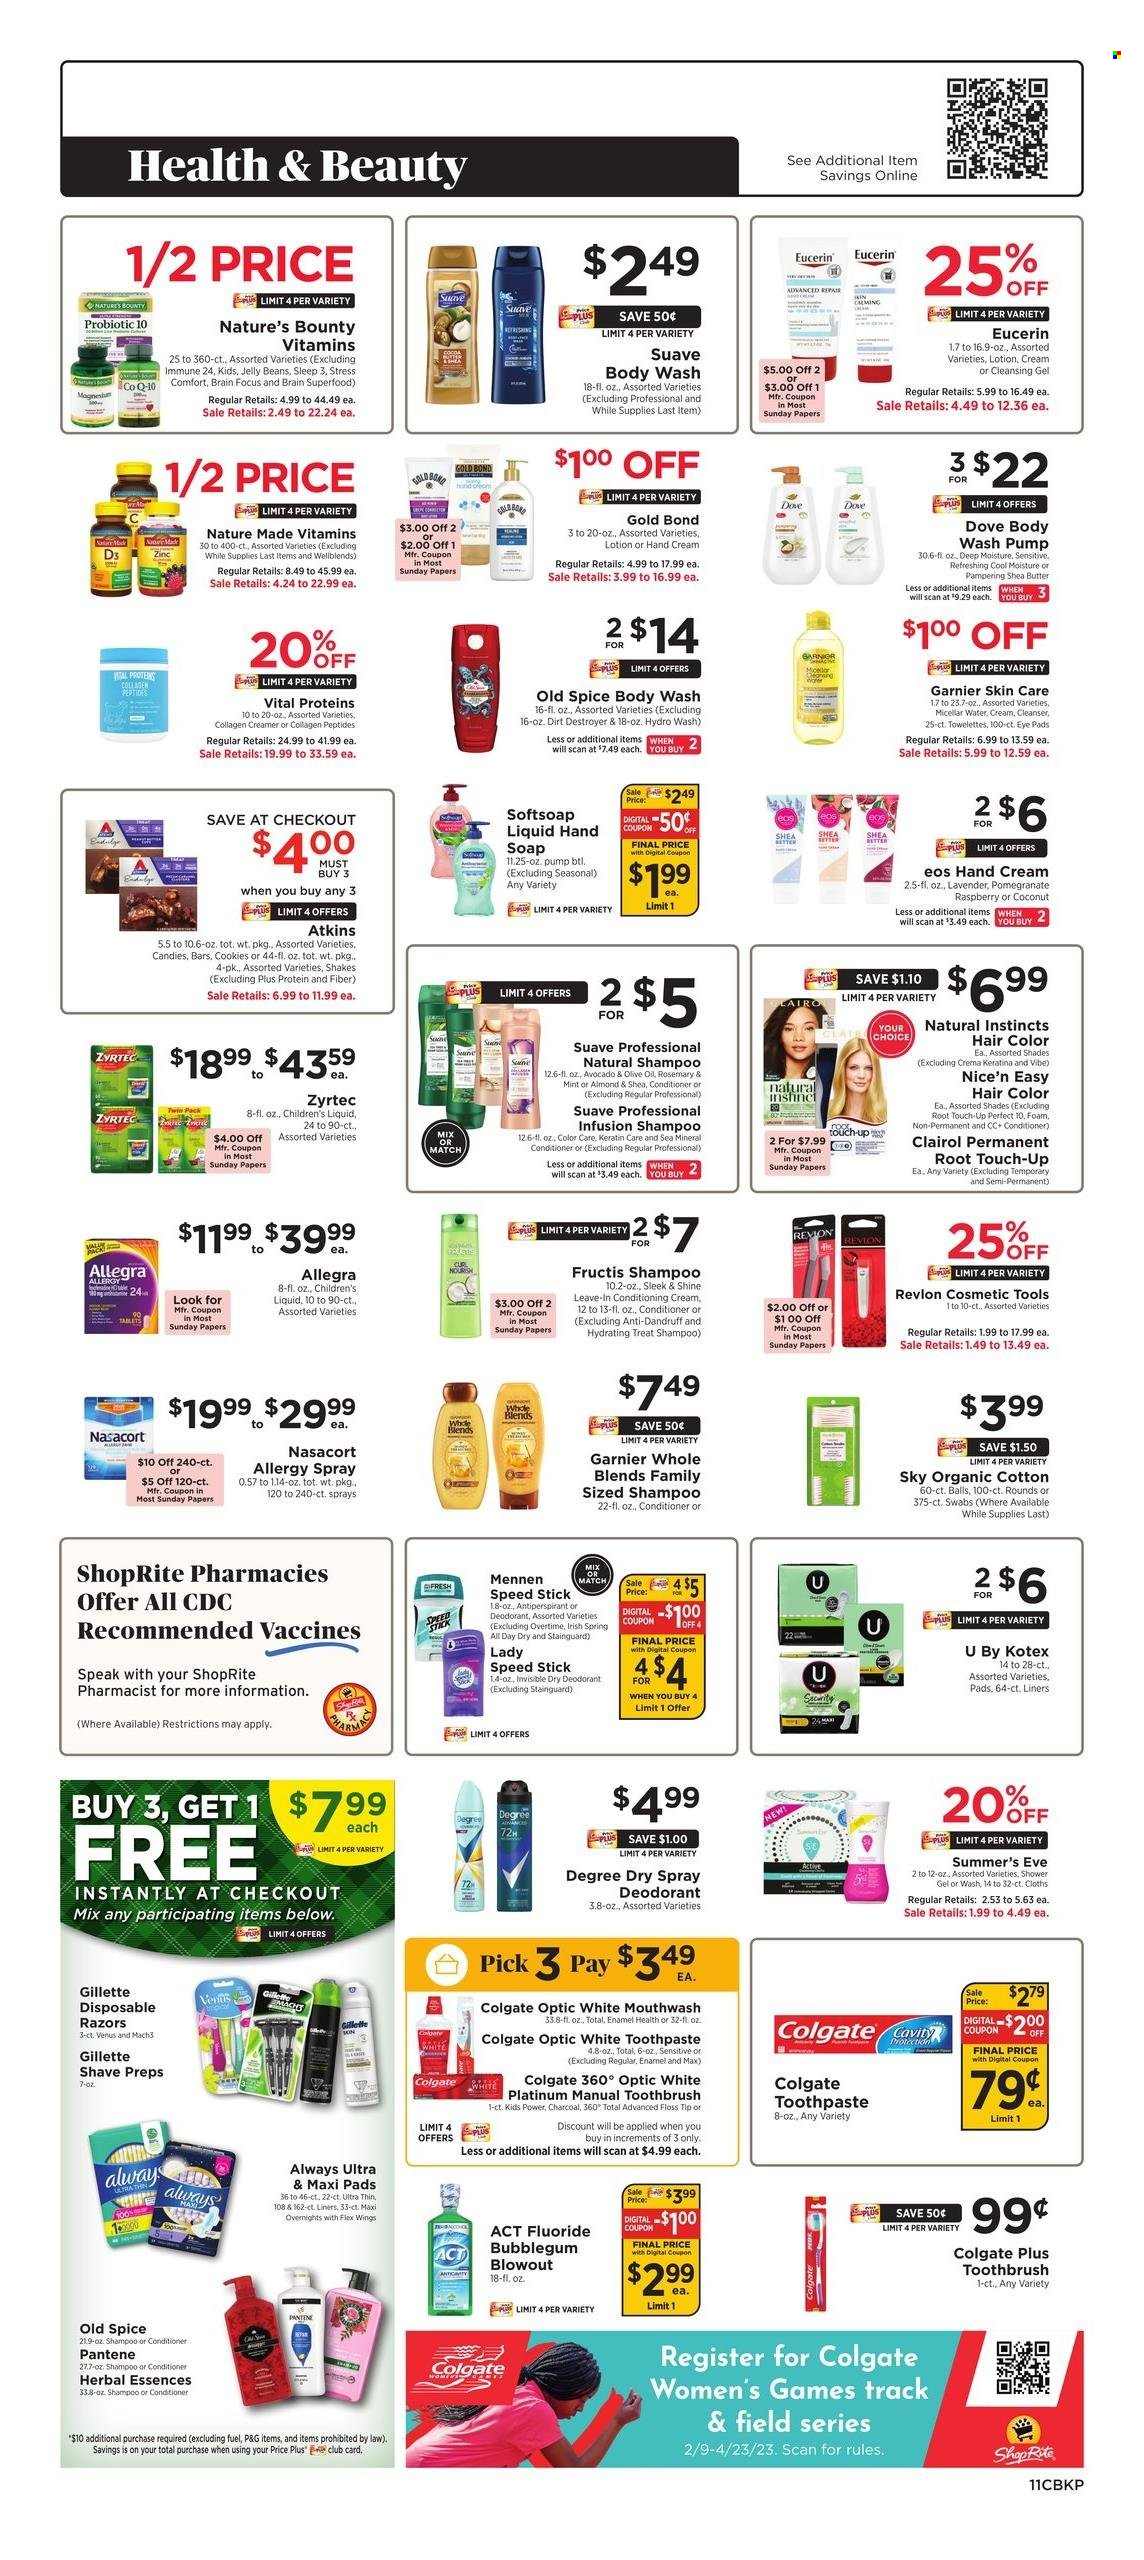 thumbnail - ShopRite Flyer - 03/26/2023 - 04/01/2023 - Sales products - shake, creamer, cookies, Dove, bubblegum, jelly beans, rosemary, spice, olive oil, water, cosmetic tools, body wash, shampoo, shower gel, Softsoap, Suave, hand soap, Old Spice, soap, Colgate, toothbrush, toothpaste, mouthwash, sanitary pads, Kotex, cleanser, Garnier, micellar water, Root Touch-Up, Clairol, conditioner, Revlon, Pantene, hair color, Herbal Essences, keratin, Fructis, body lotion, Eucerin, shea butter, hand cream, anti-perspirant, Speed Stick, deodorant, Gillette, Venus, disposable razor, Nature Made, Nature's Bounty, Zyrtec, Vital Proteins, pomegranate. Page 11.